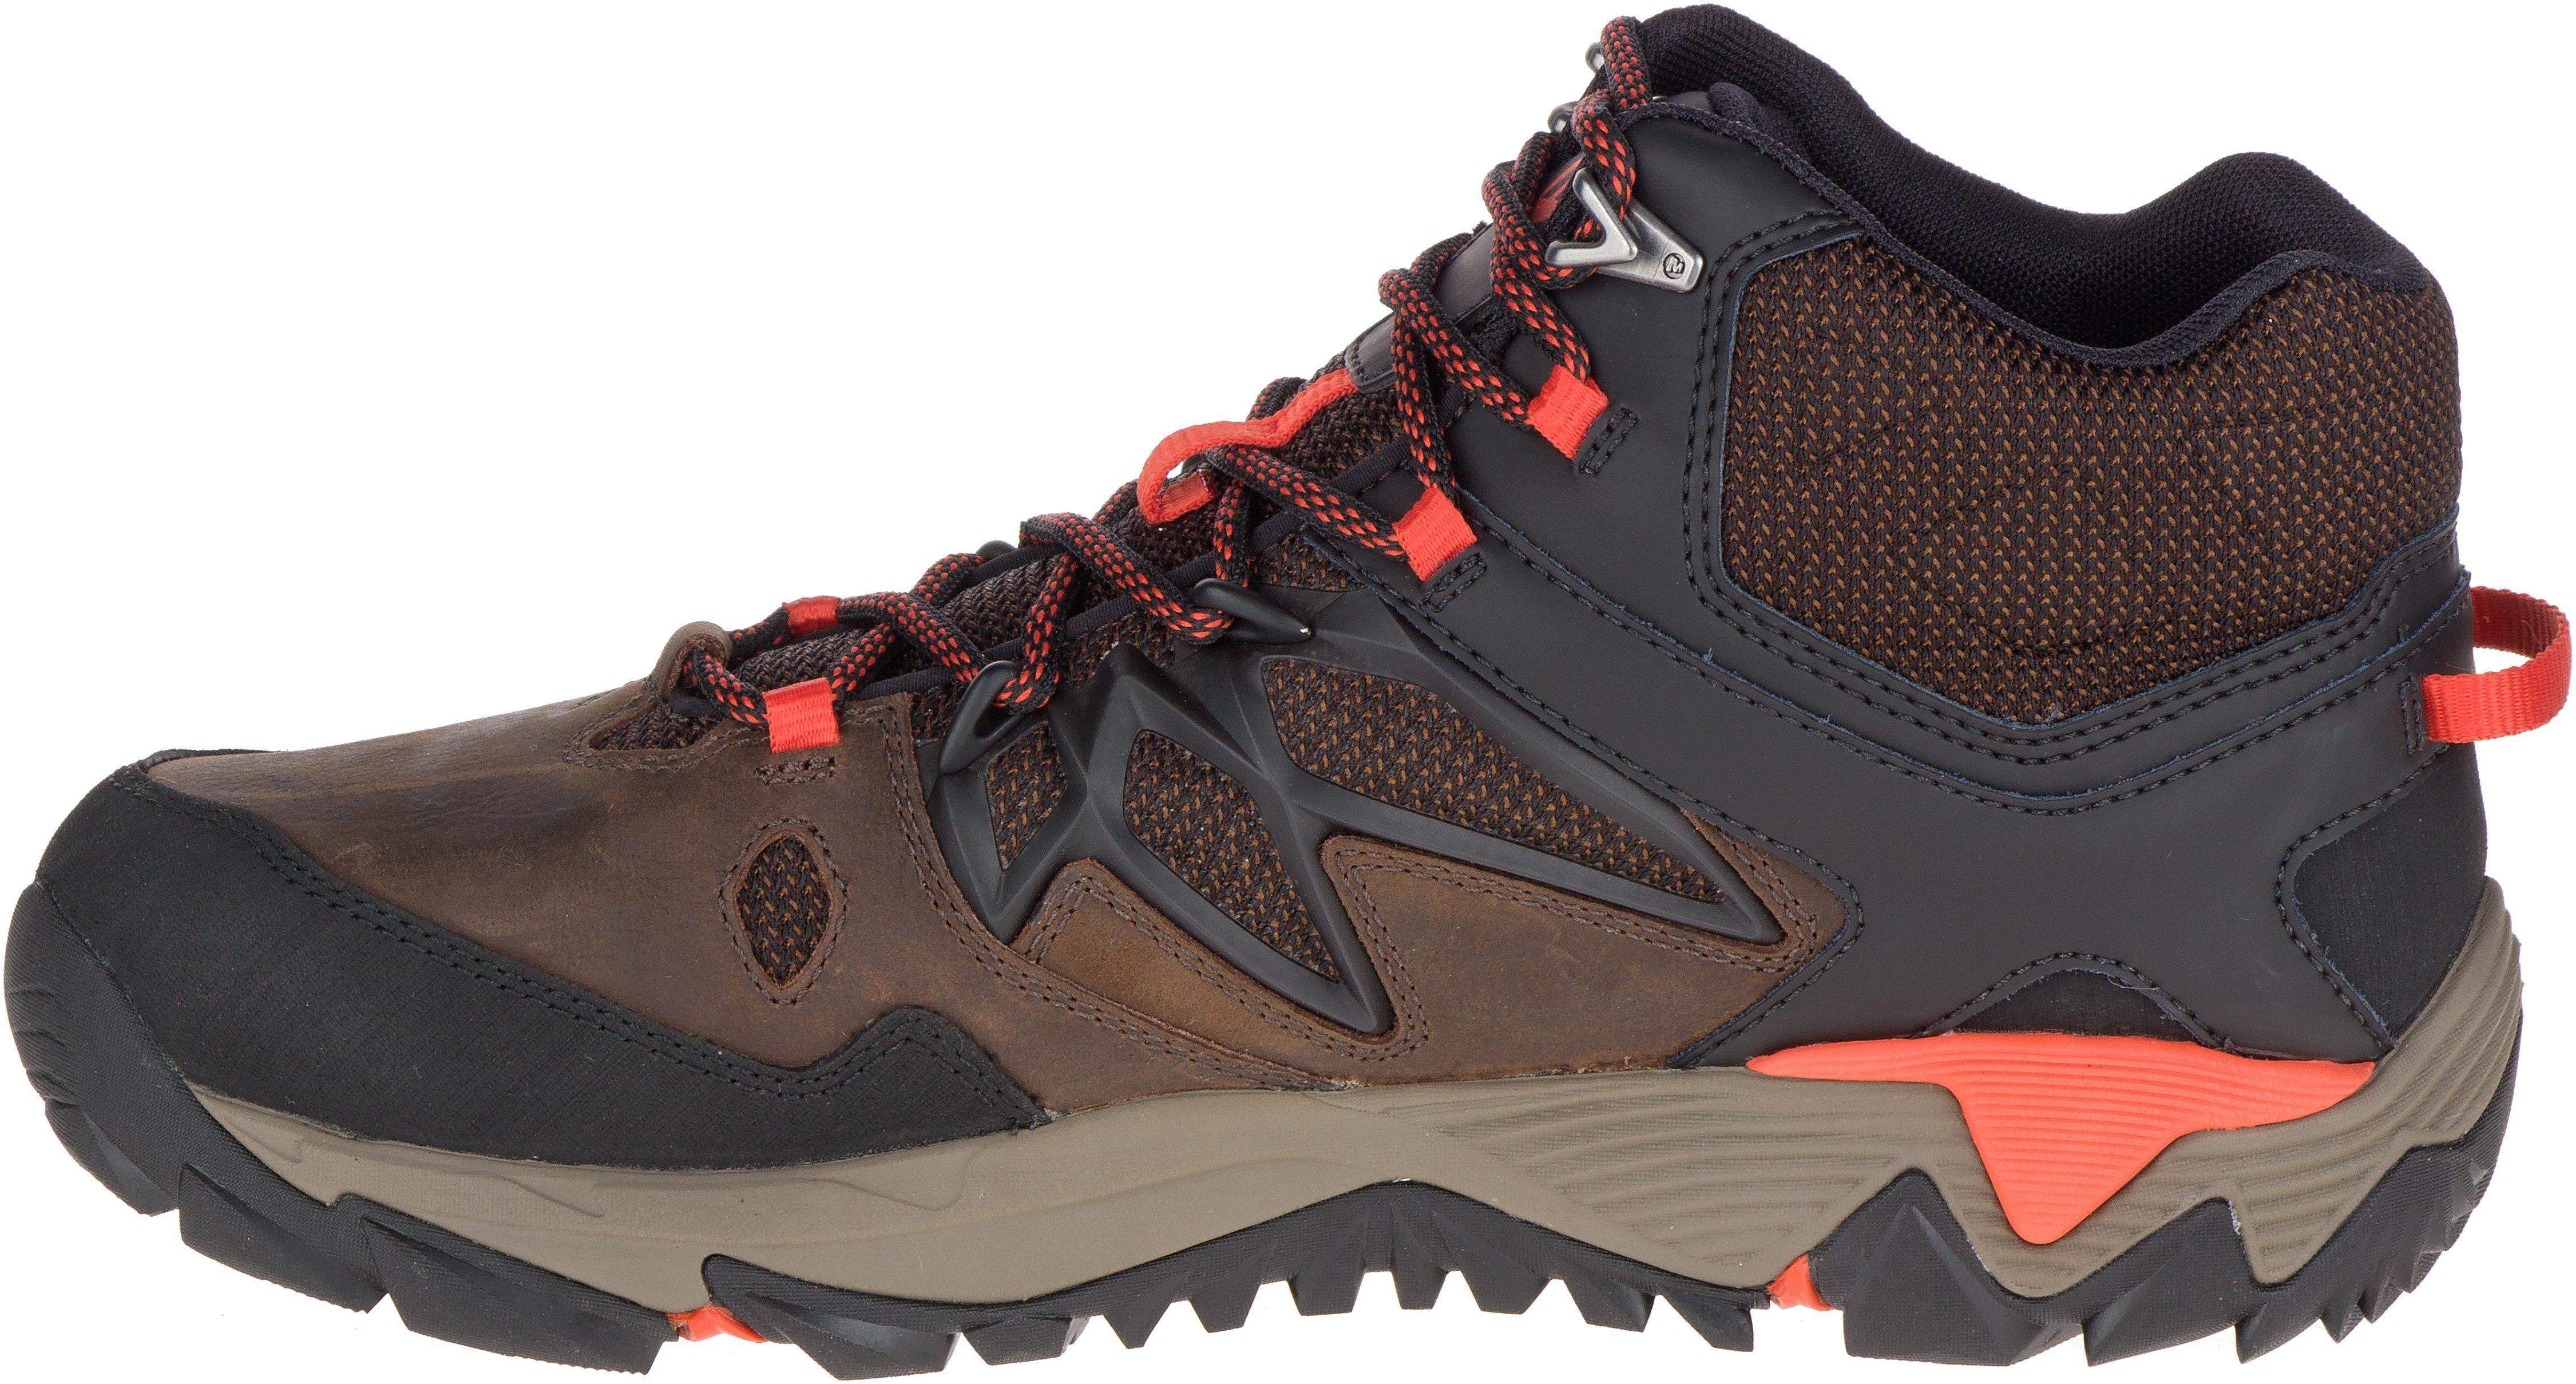 Men's Merrell All Out Blaze 2 Mid Gore-Tex Trail Shoe Walking Boot ...